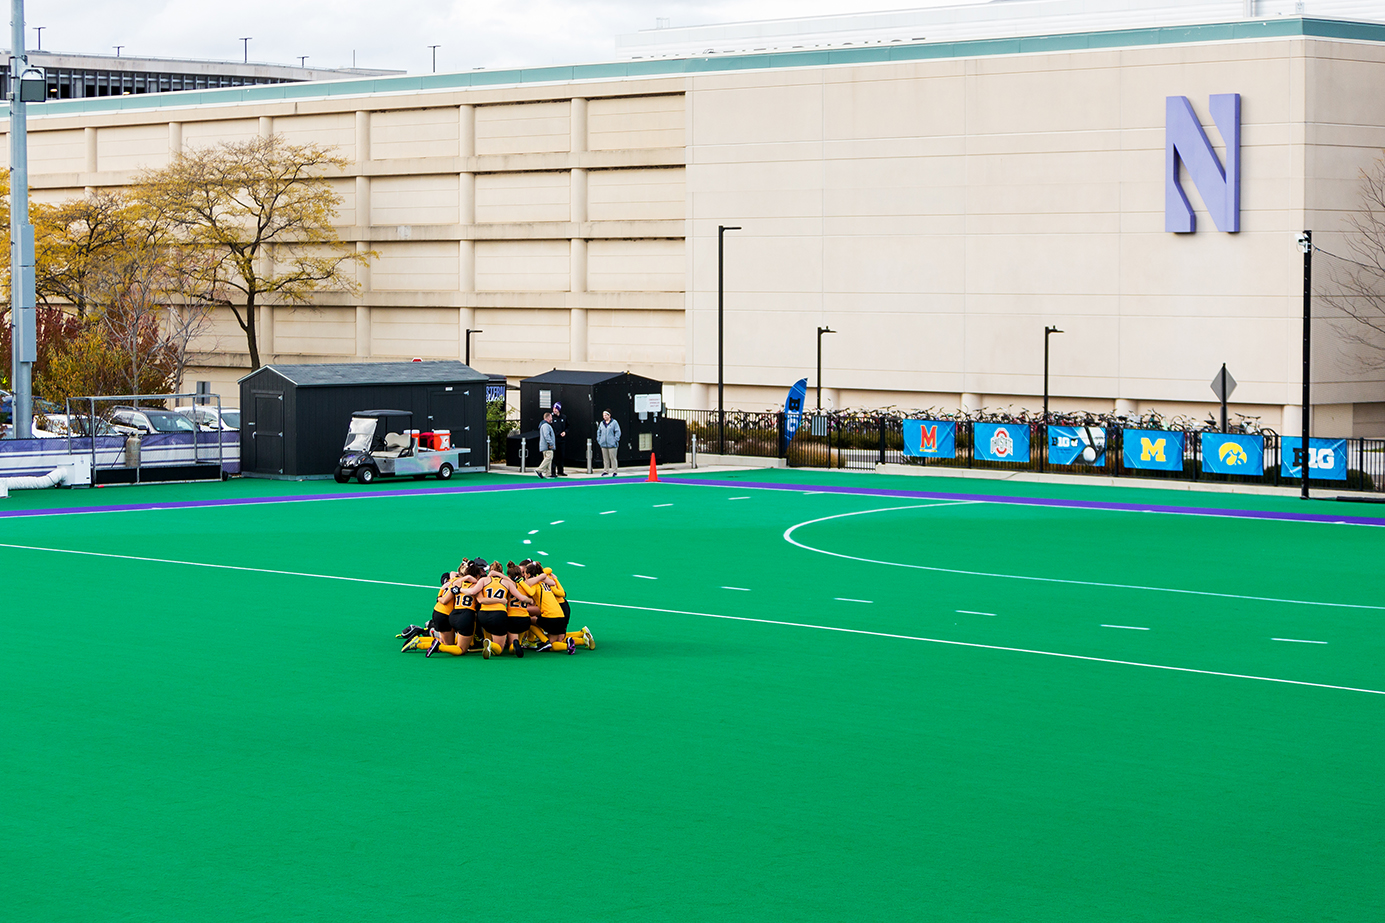  Iowa players huddle up before a penalty corner during the Semifinals in the Big Ten Field Hockey Tournament at Lakeside Field in Evanston, IL on Friday, Nov. 2, 2018. The no. 8 ranked Hawkeyes defeated the no. 7 ranked Wolverines 2-1.  